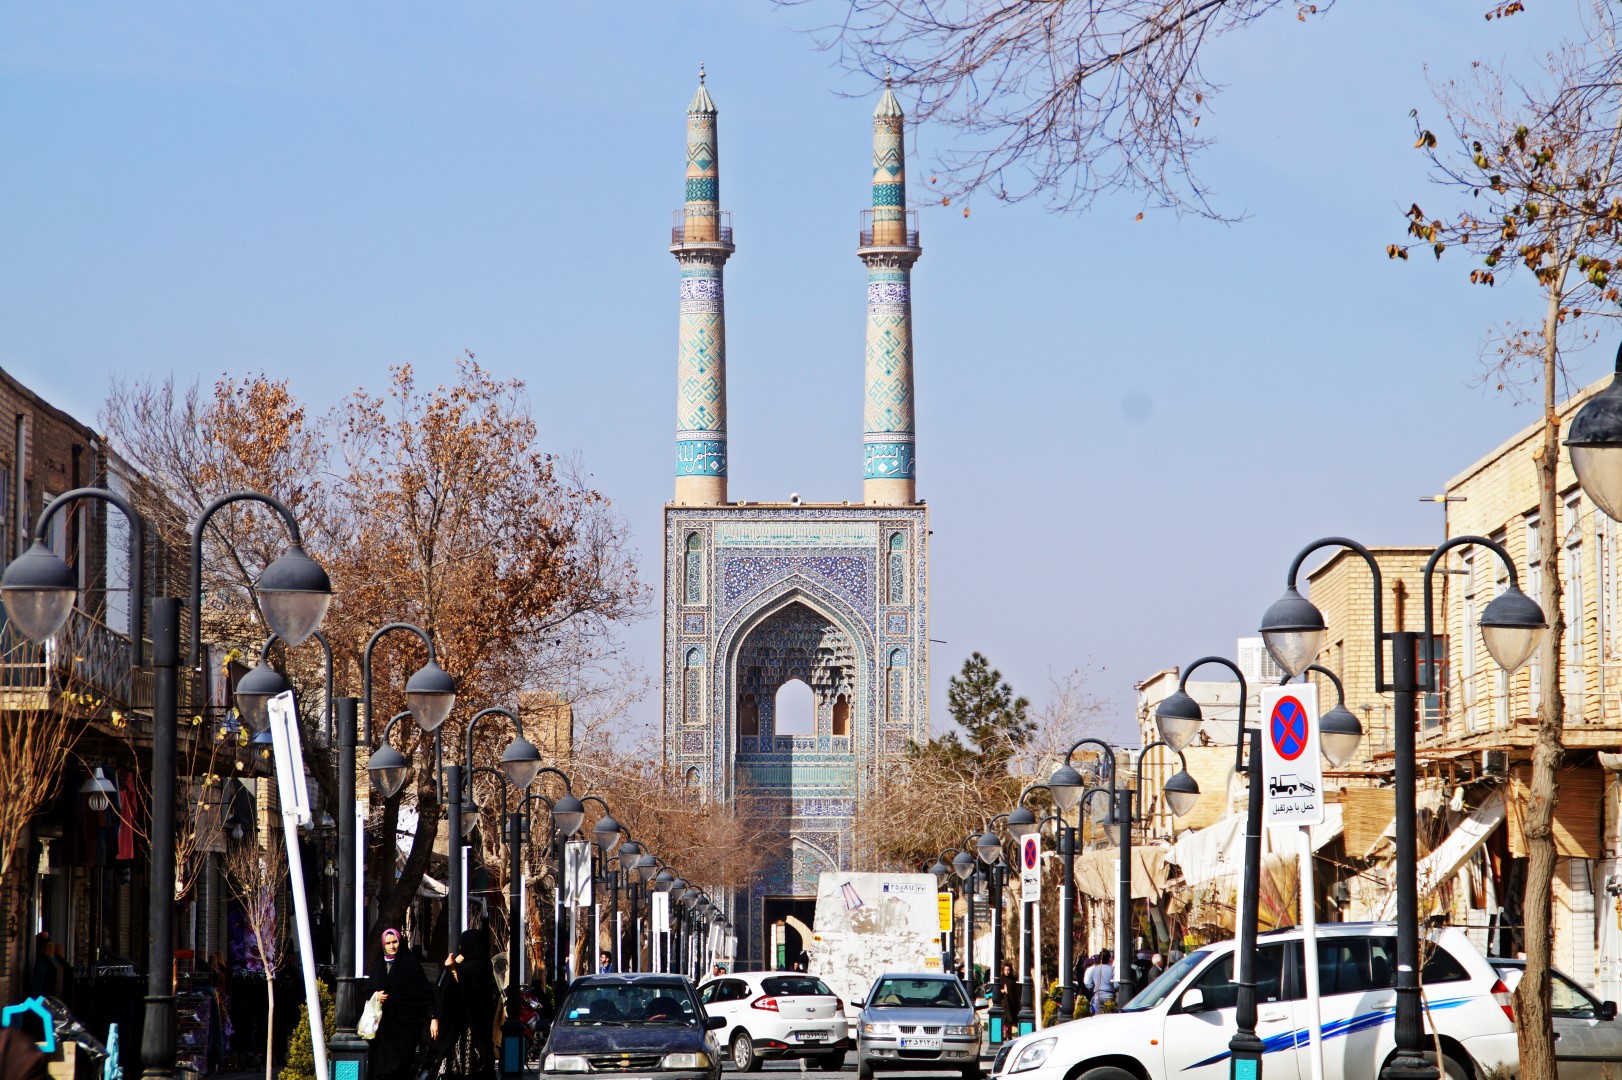 The center of Yazd